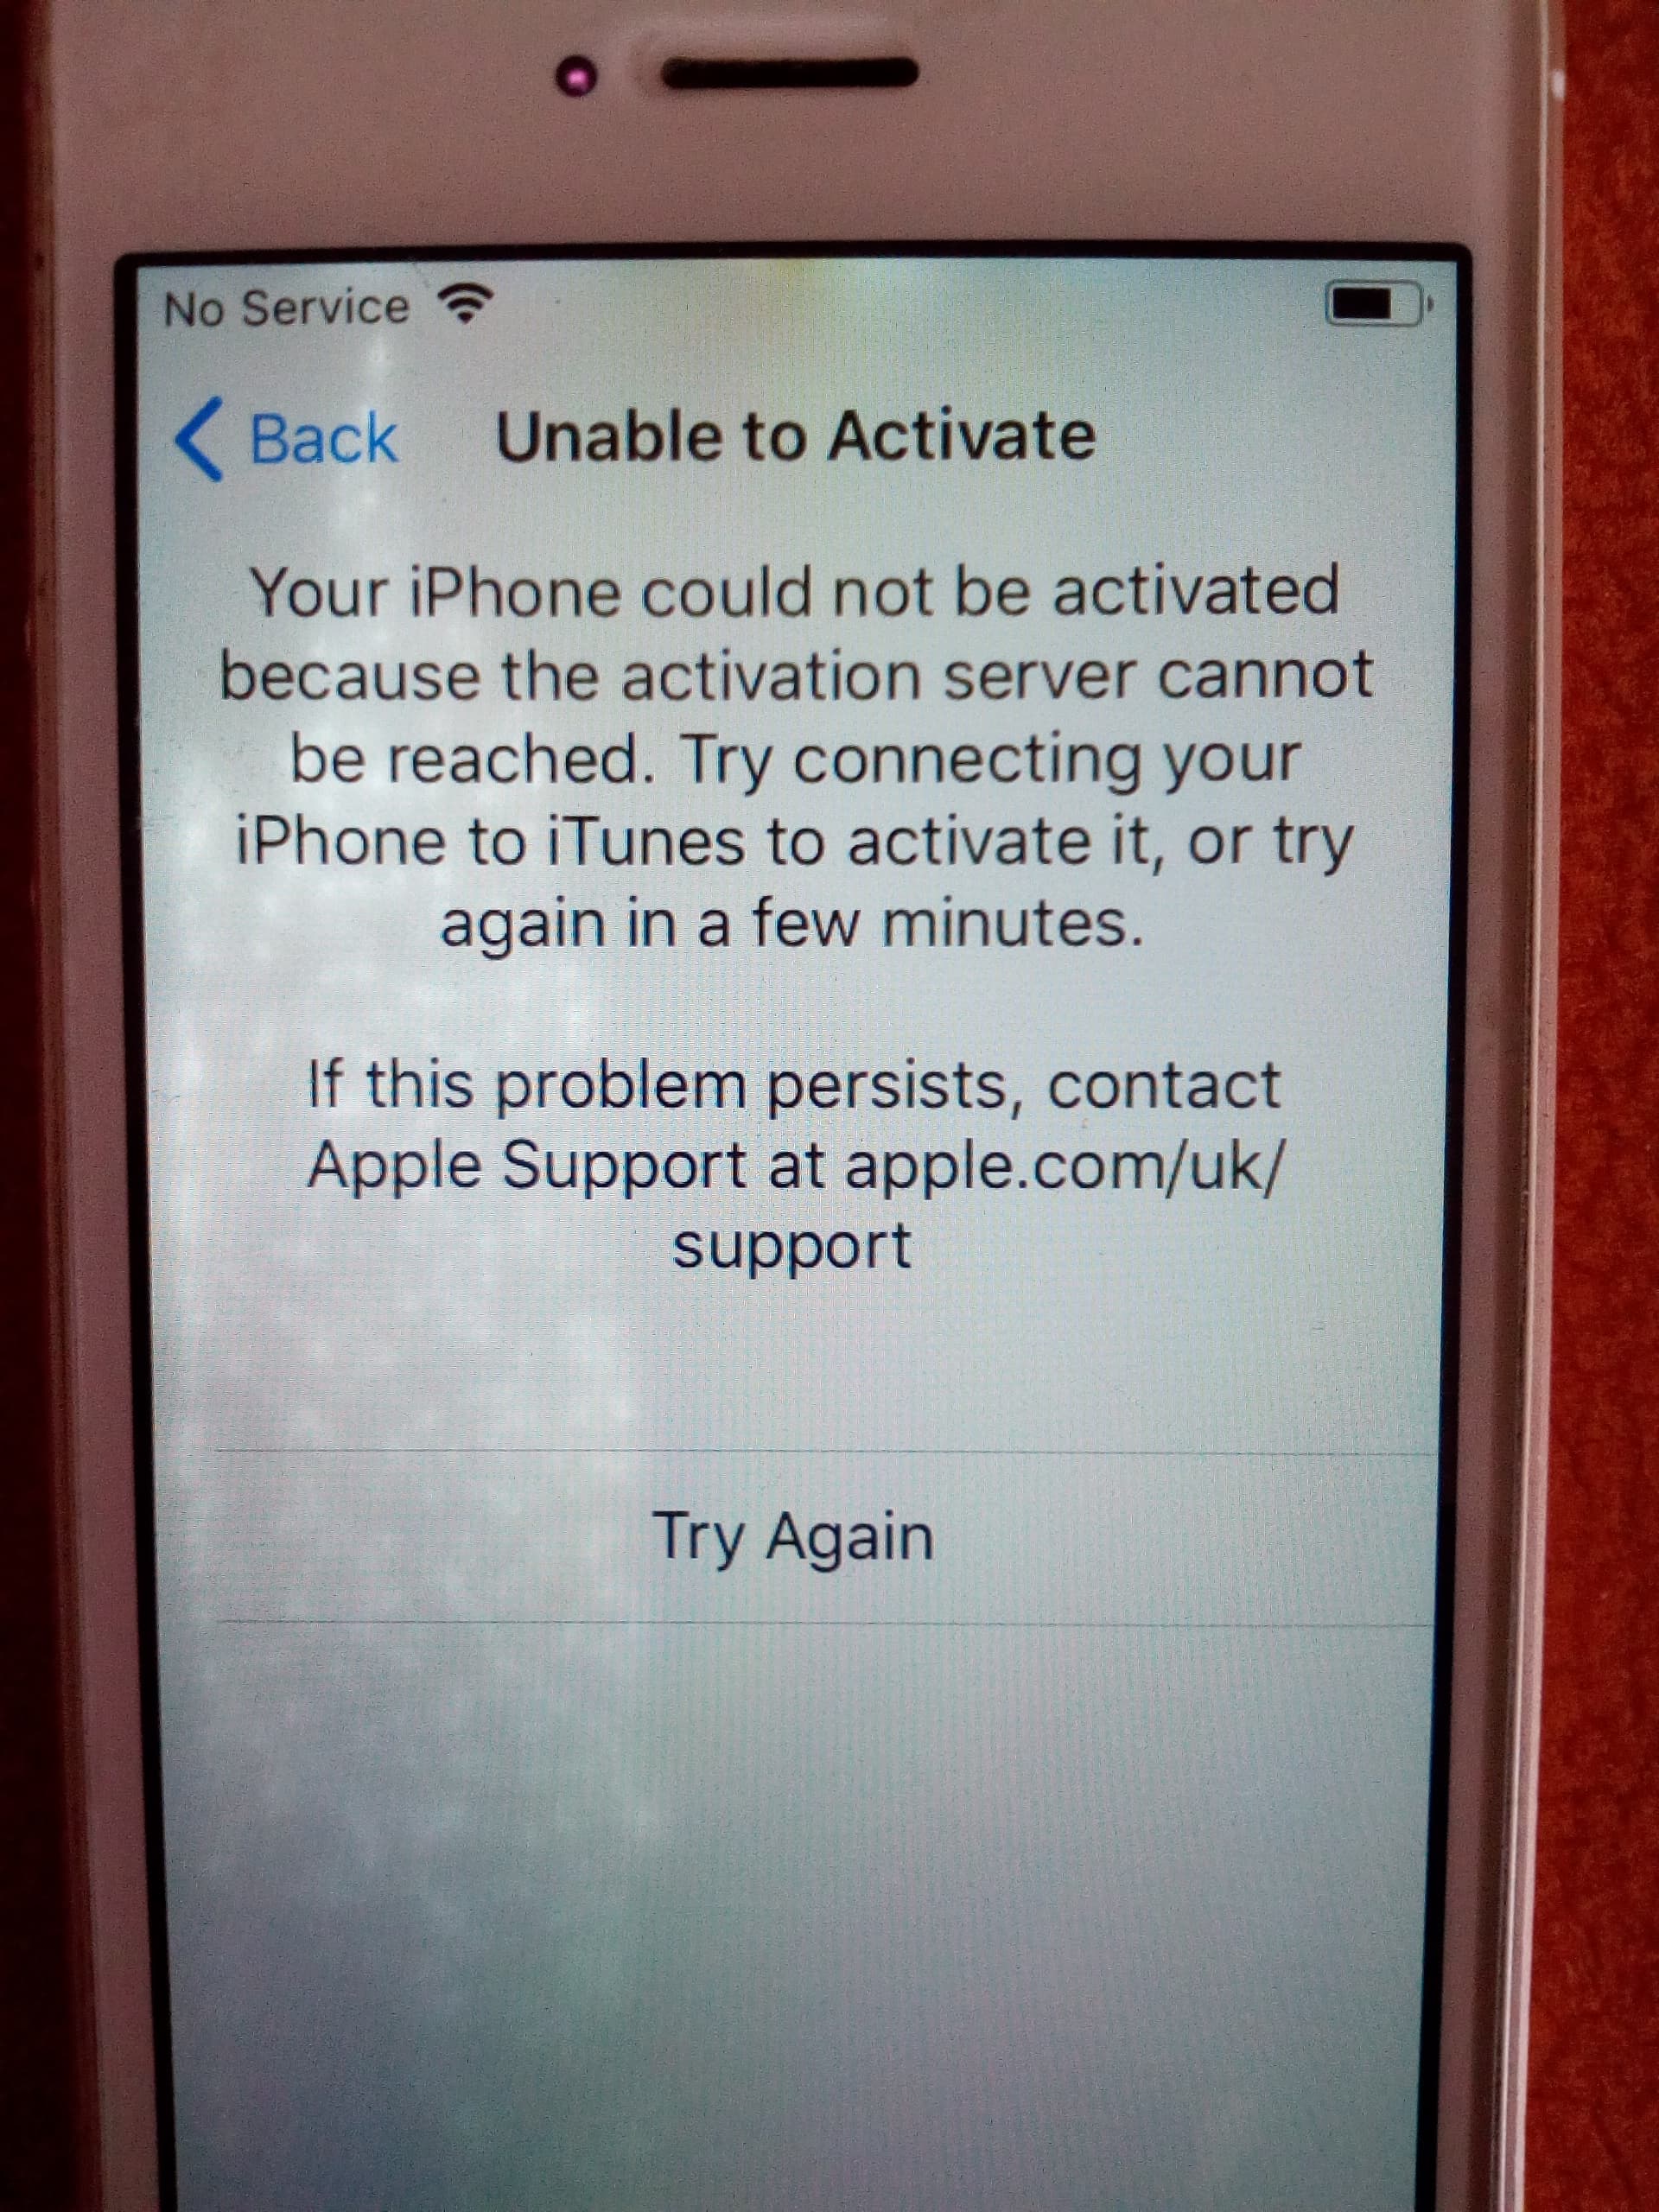 activation server cannot be reached iphone 5s